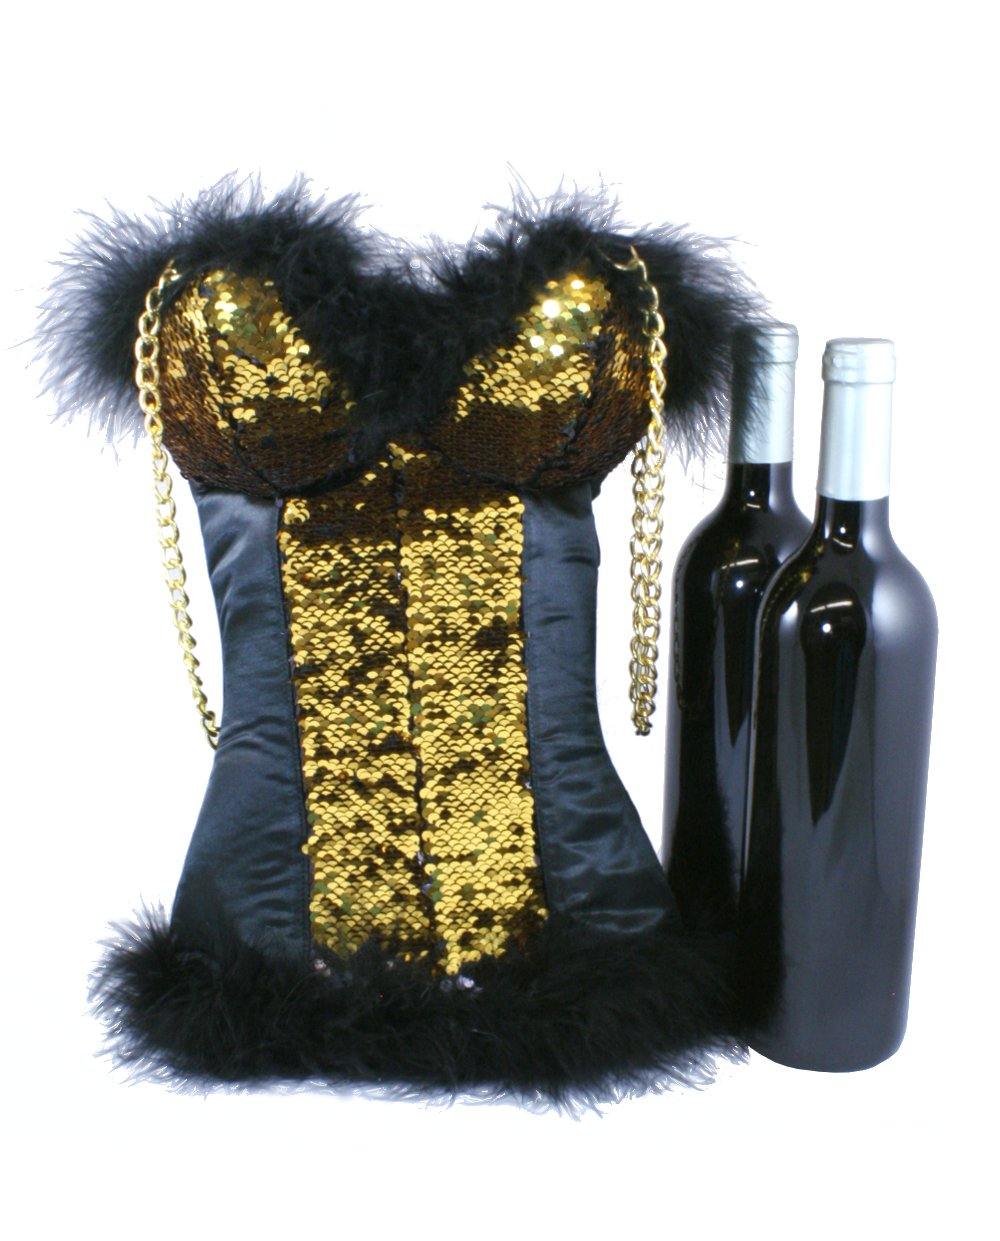 Gold to Black Reversible Sequin Corset Wine Carrier for 2 bottles by Tipsy Totes